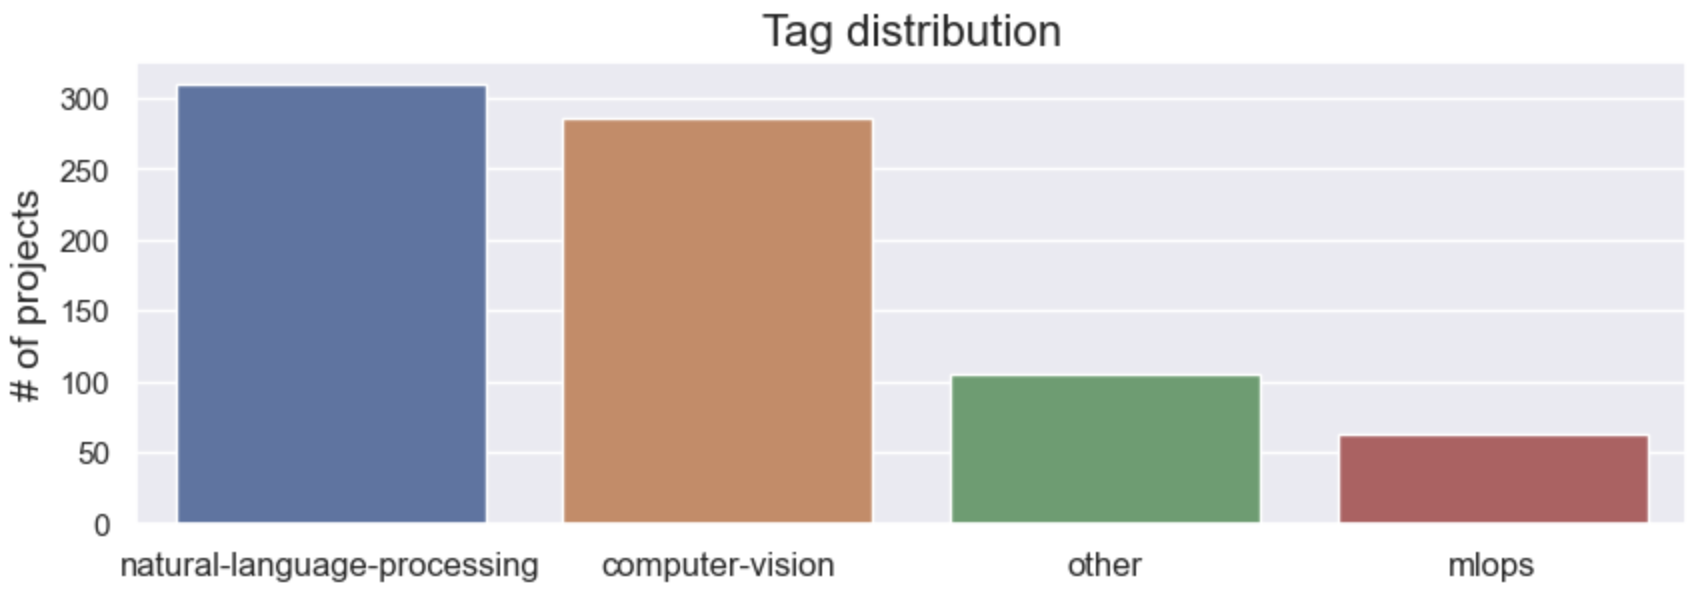 data points per tag